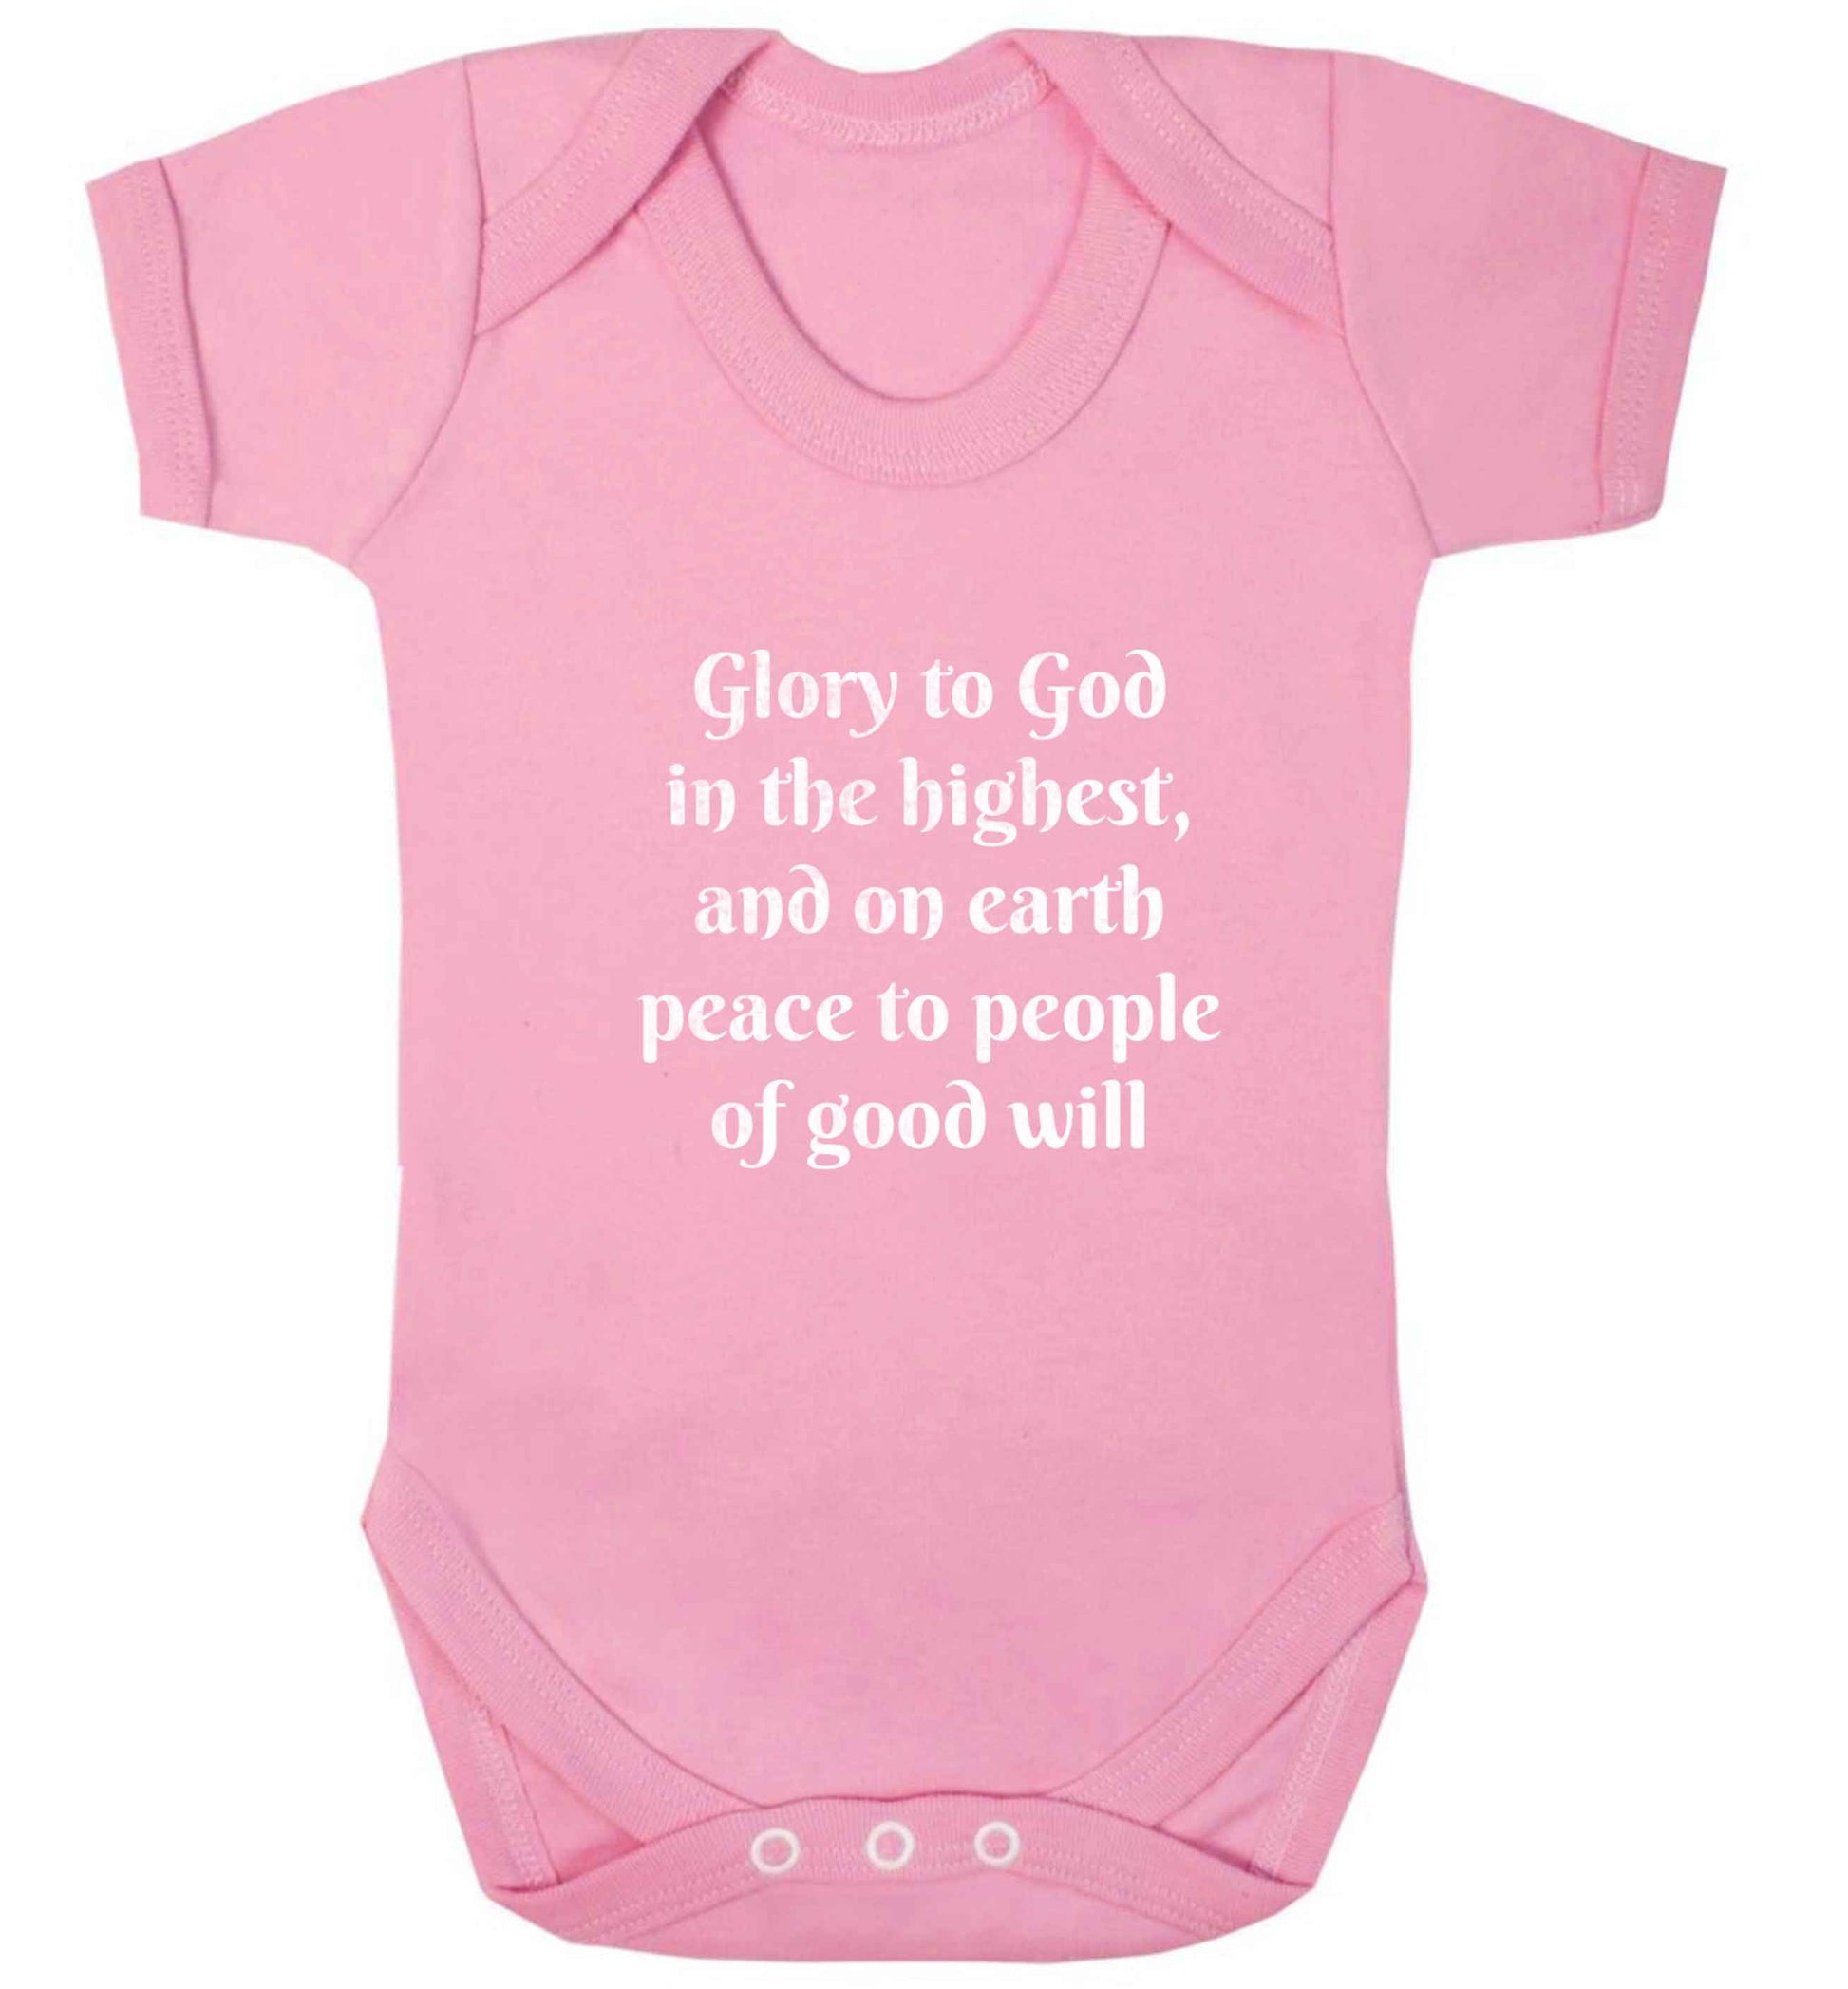 Glory to God in the highest, and on earth peace to people of good will baby vest pale pink 18-24 months